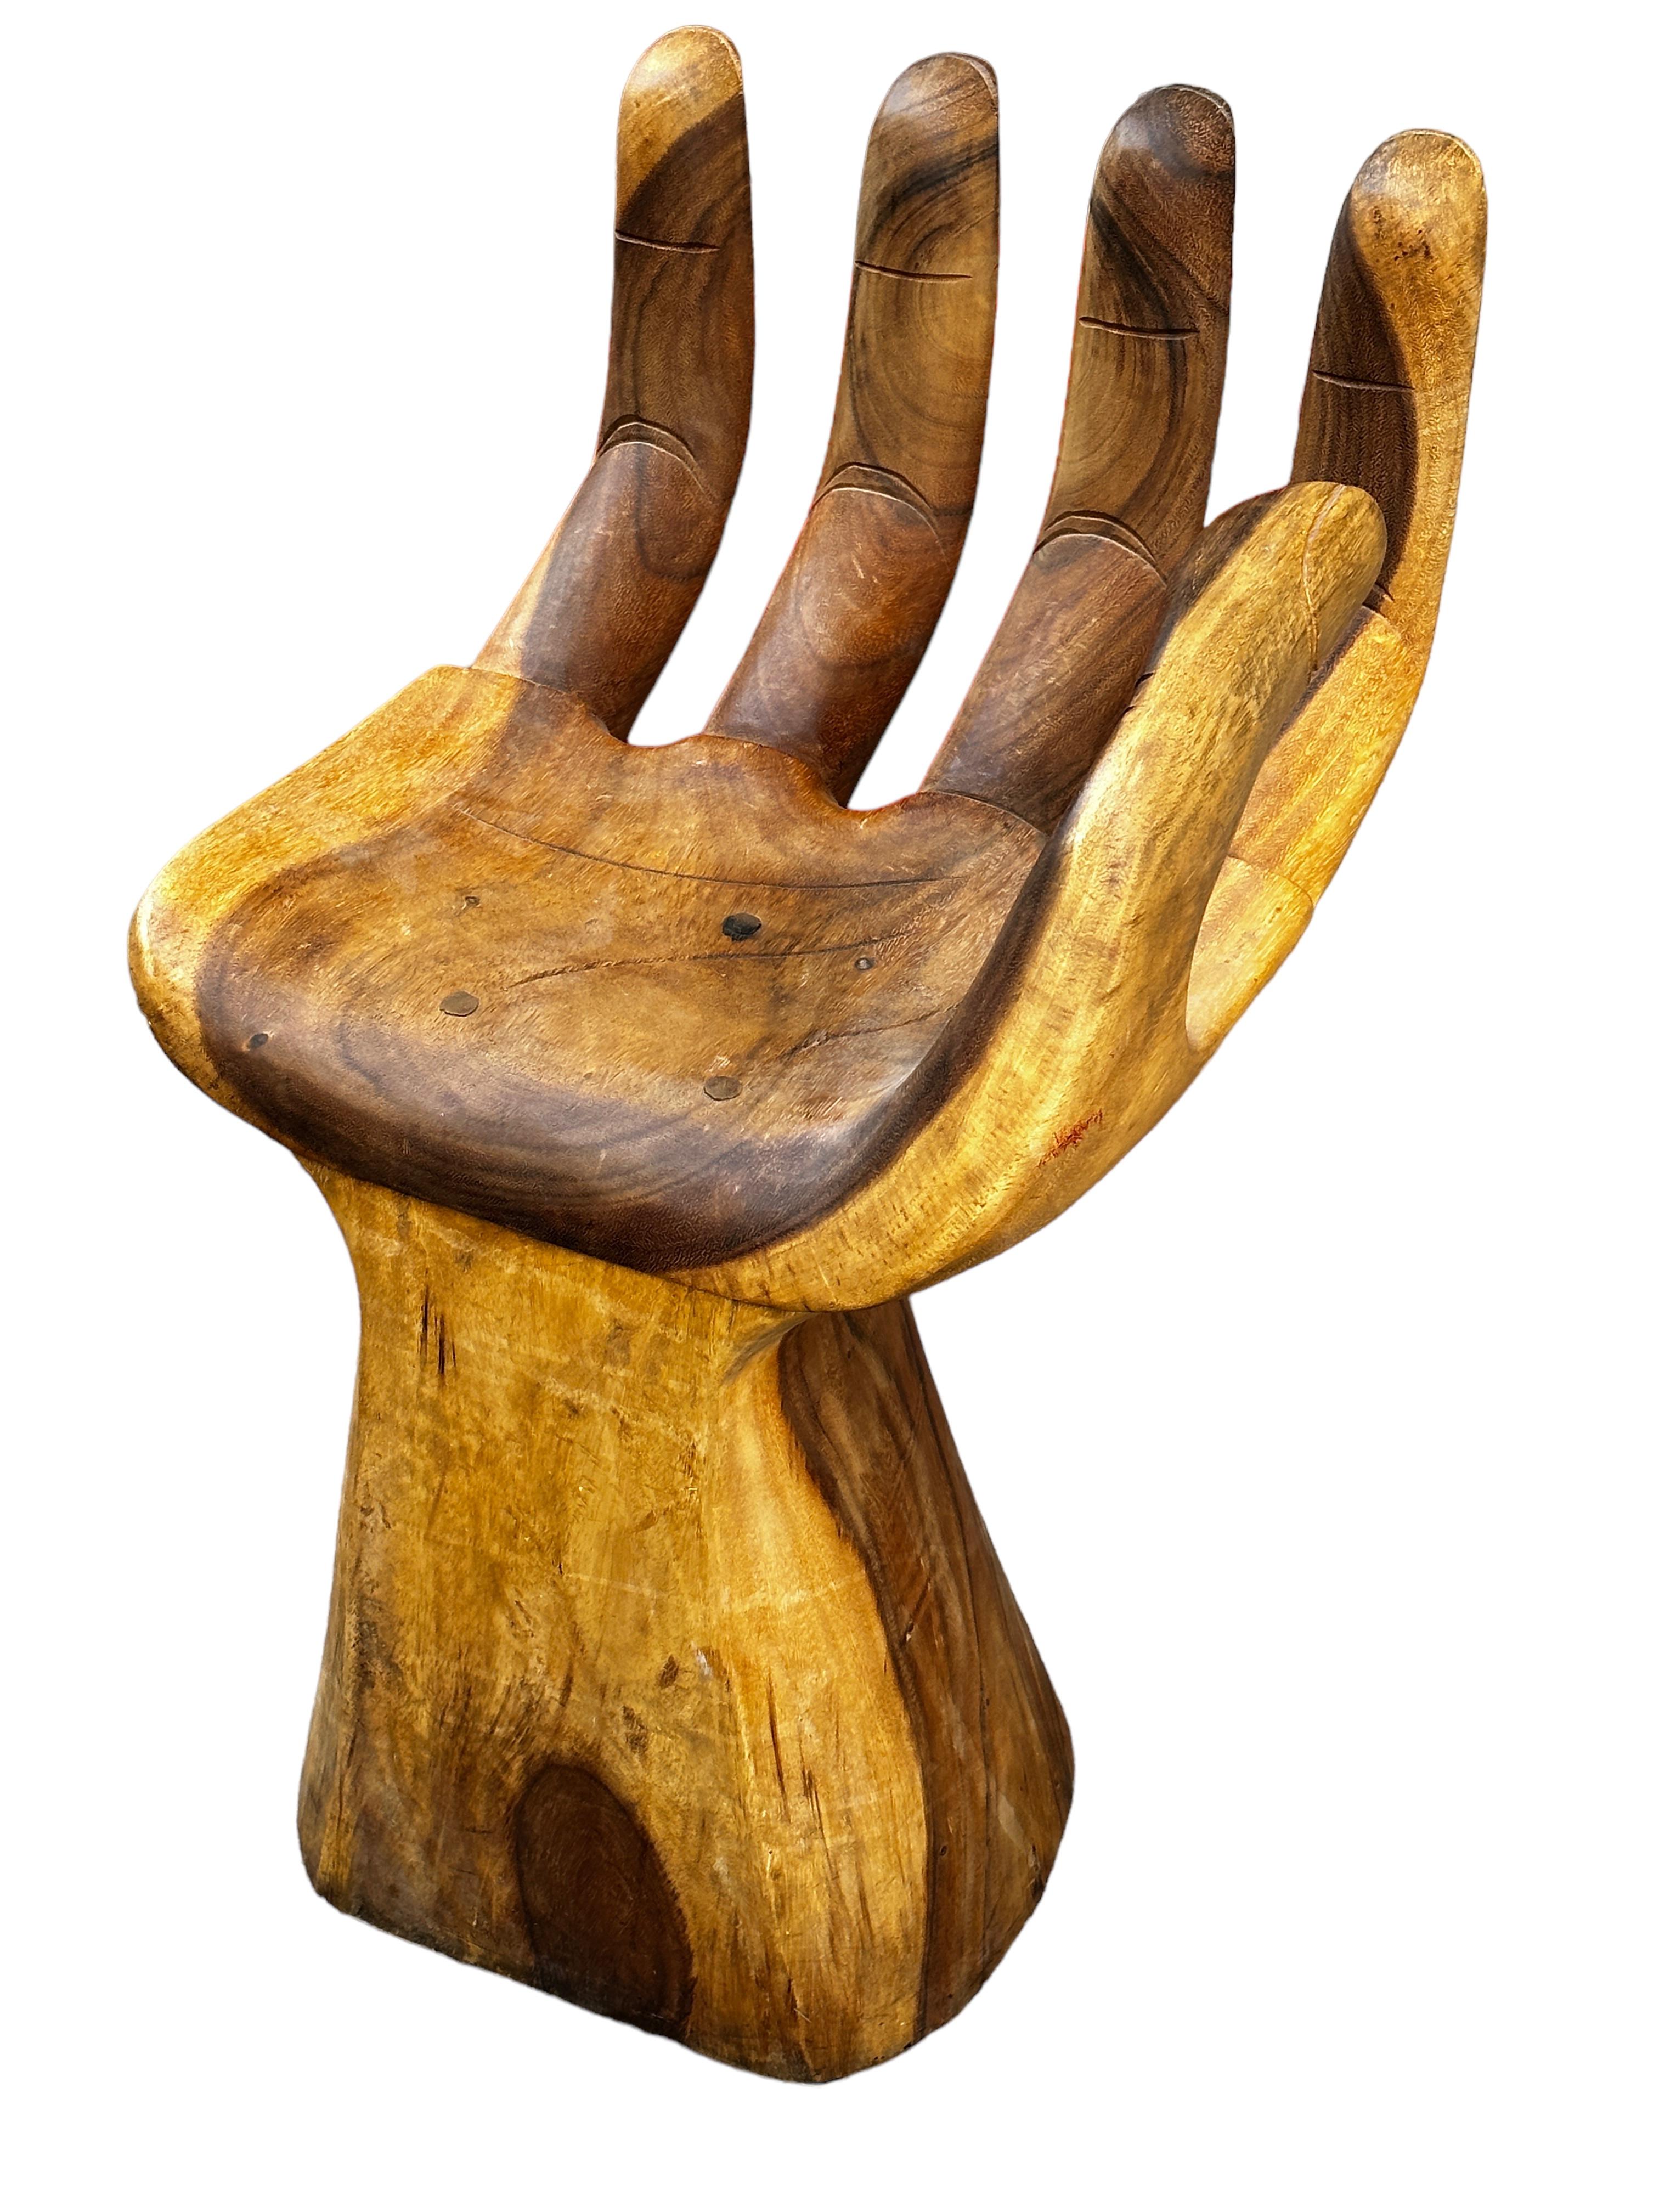 An amazing Mid-Century Modern finely detailed studio carved hand chair, circa 1970s, in the Style of Pedro Friedeberg, that brings both a meditative element and a unique functional sculpture into your home with the artisan crafted wood Carved Hand